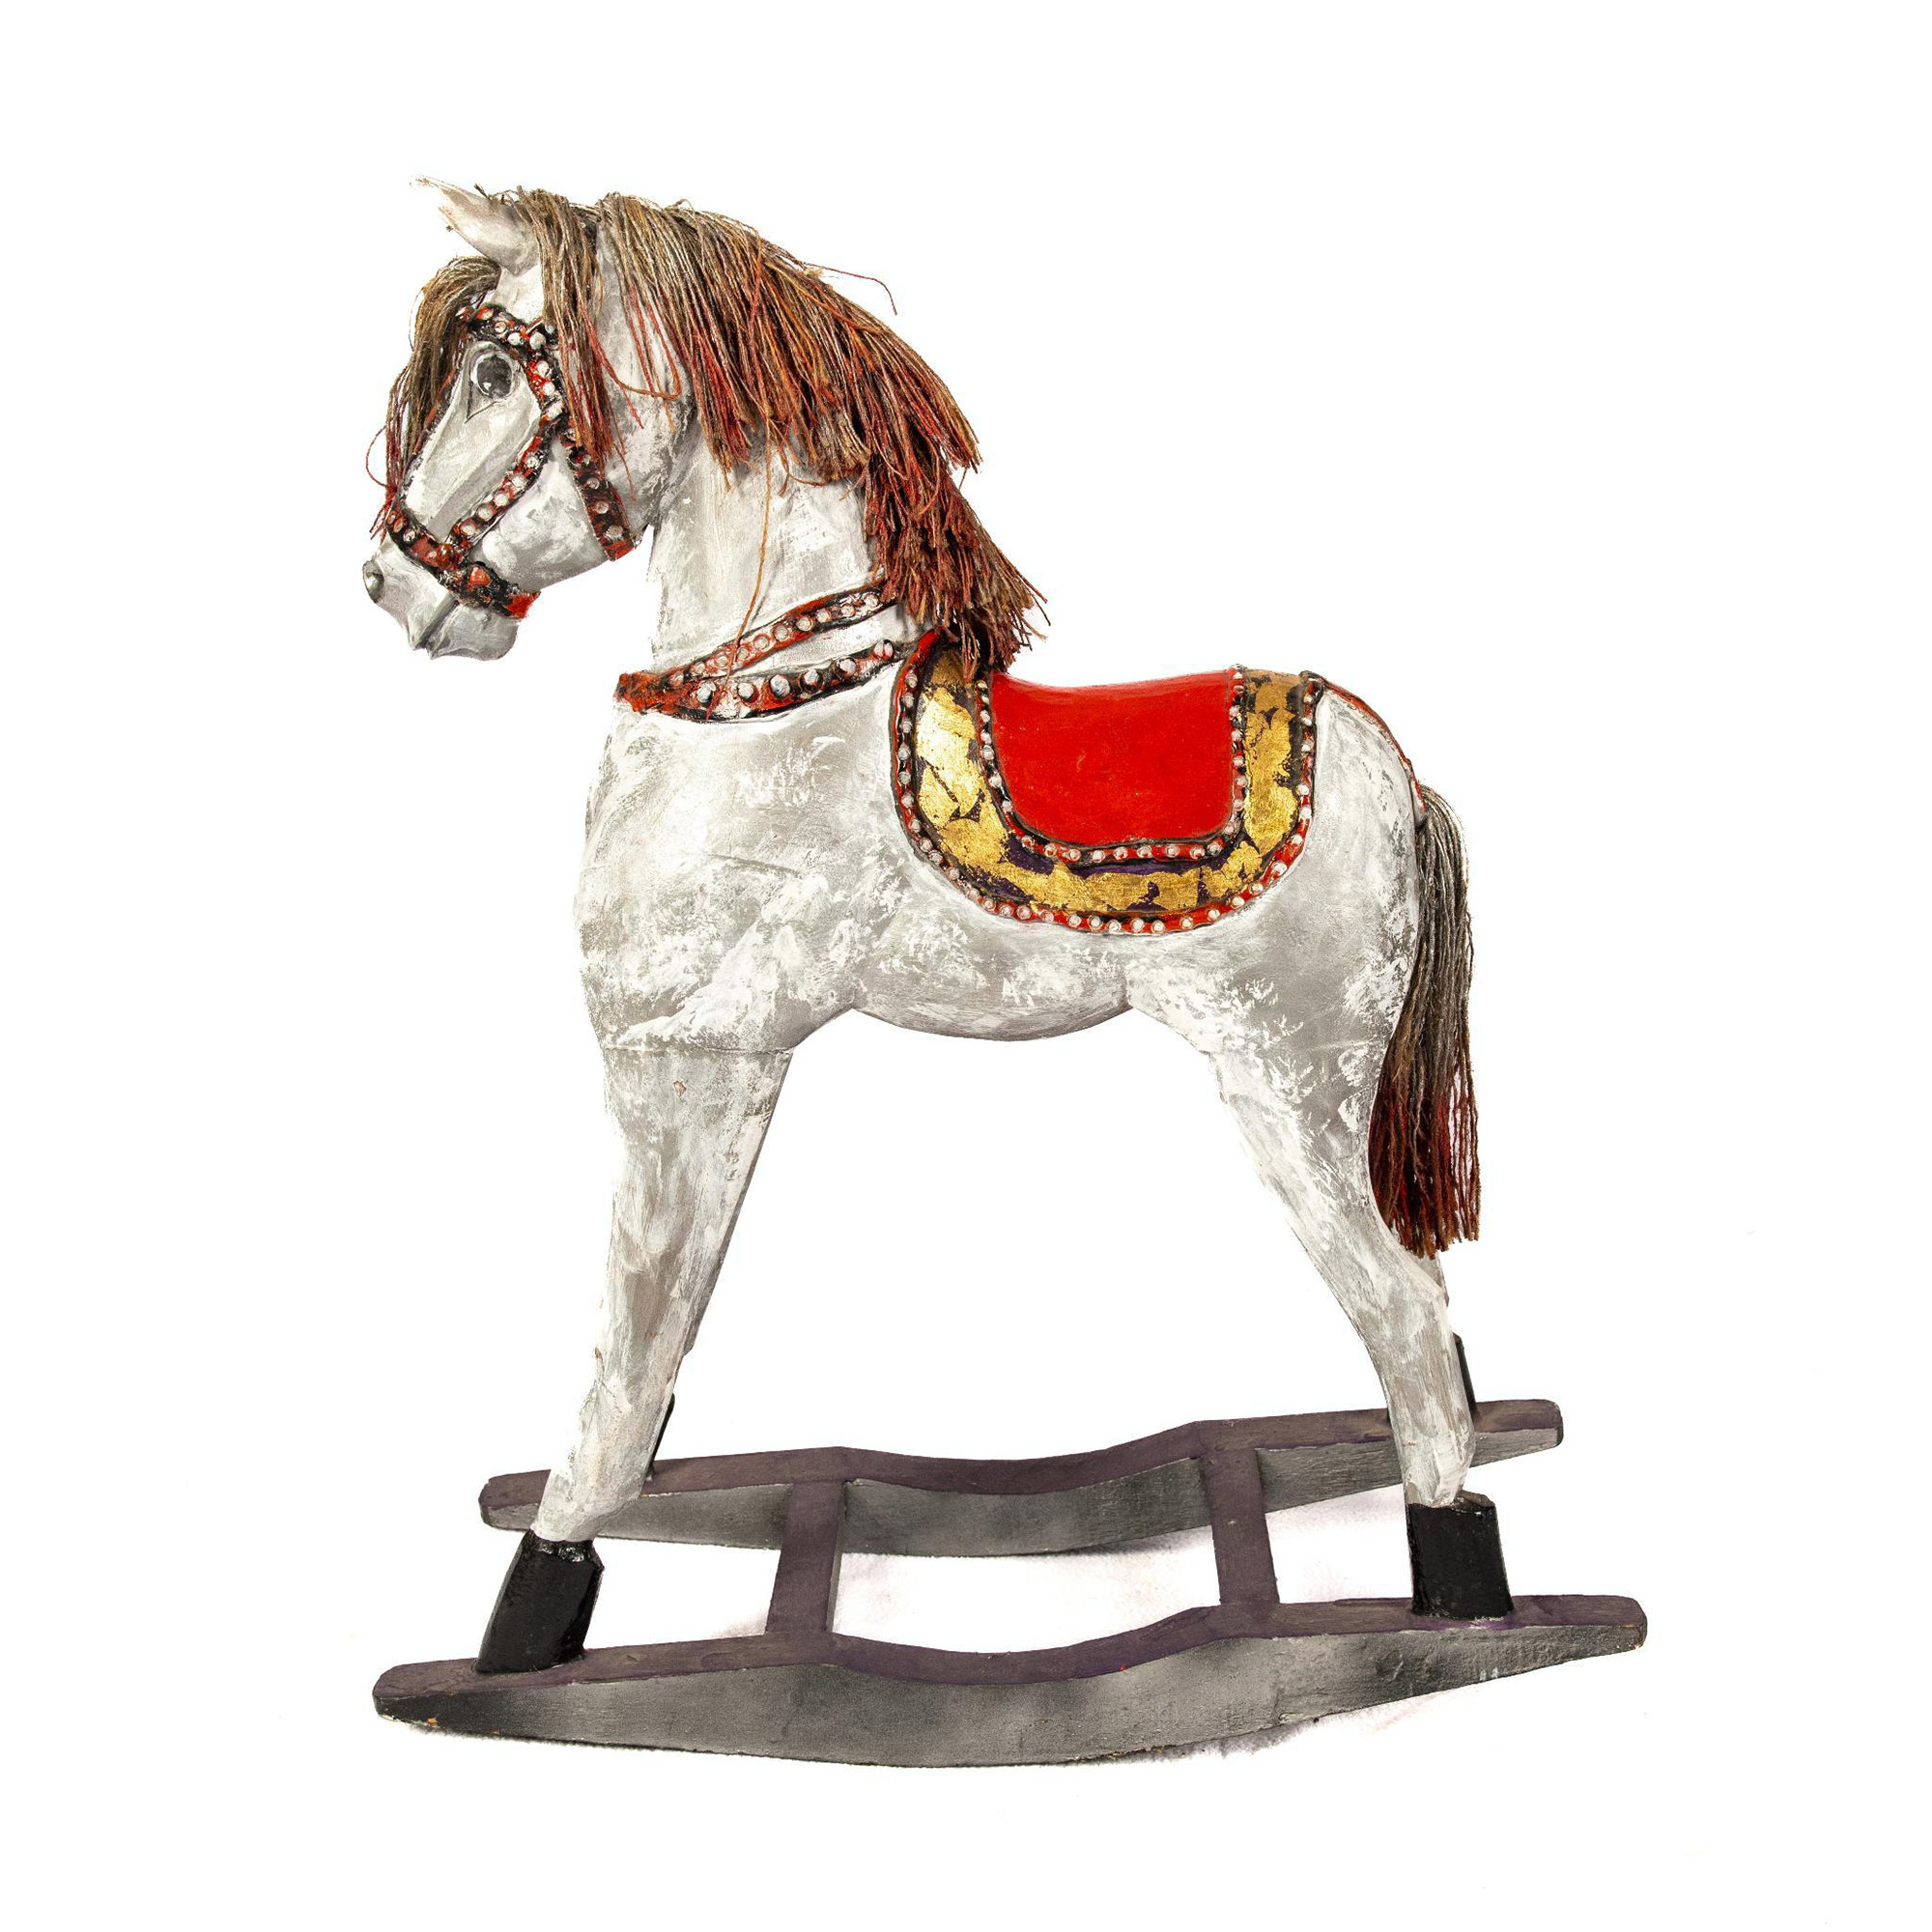 Silver and Gold Gilded Rocking Horse Decoration - Image 2 of 6